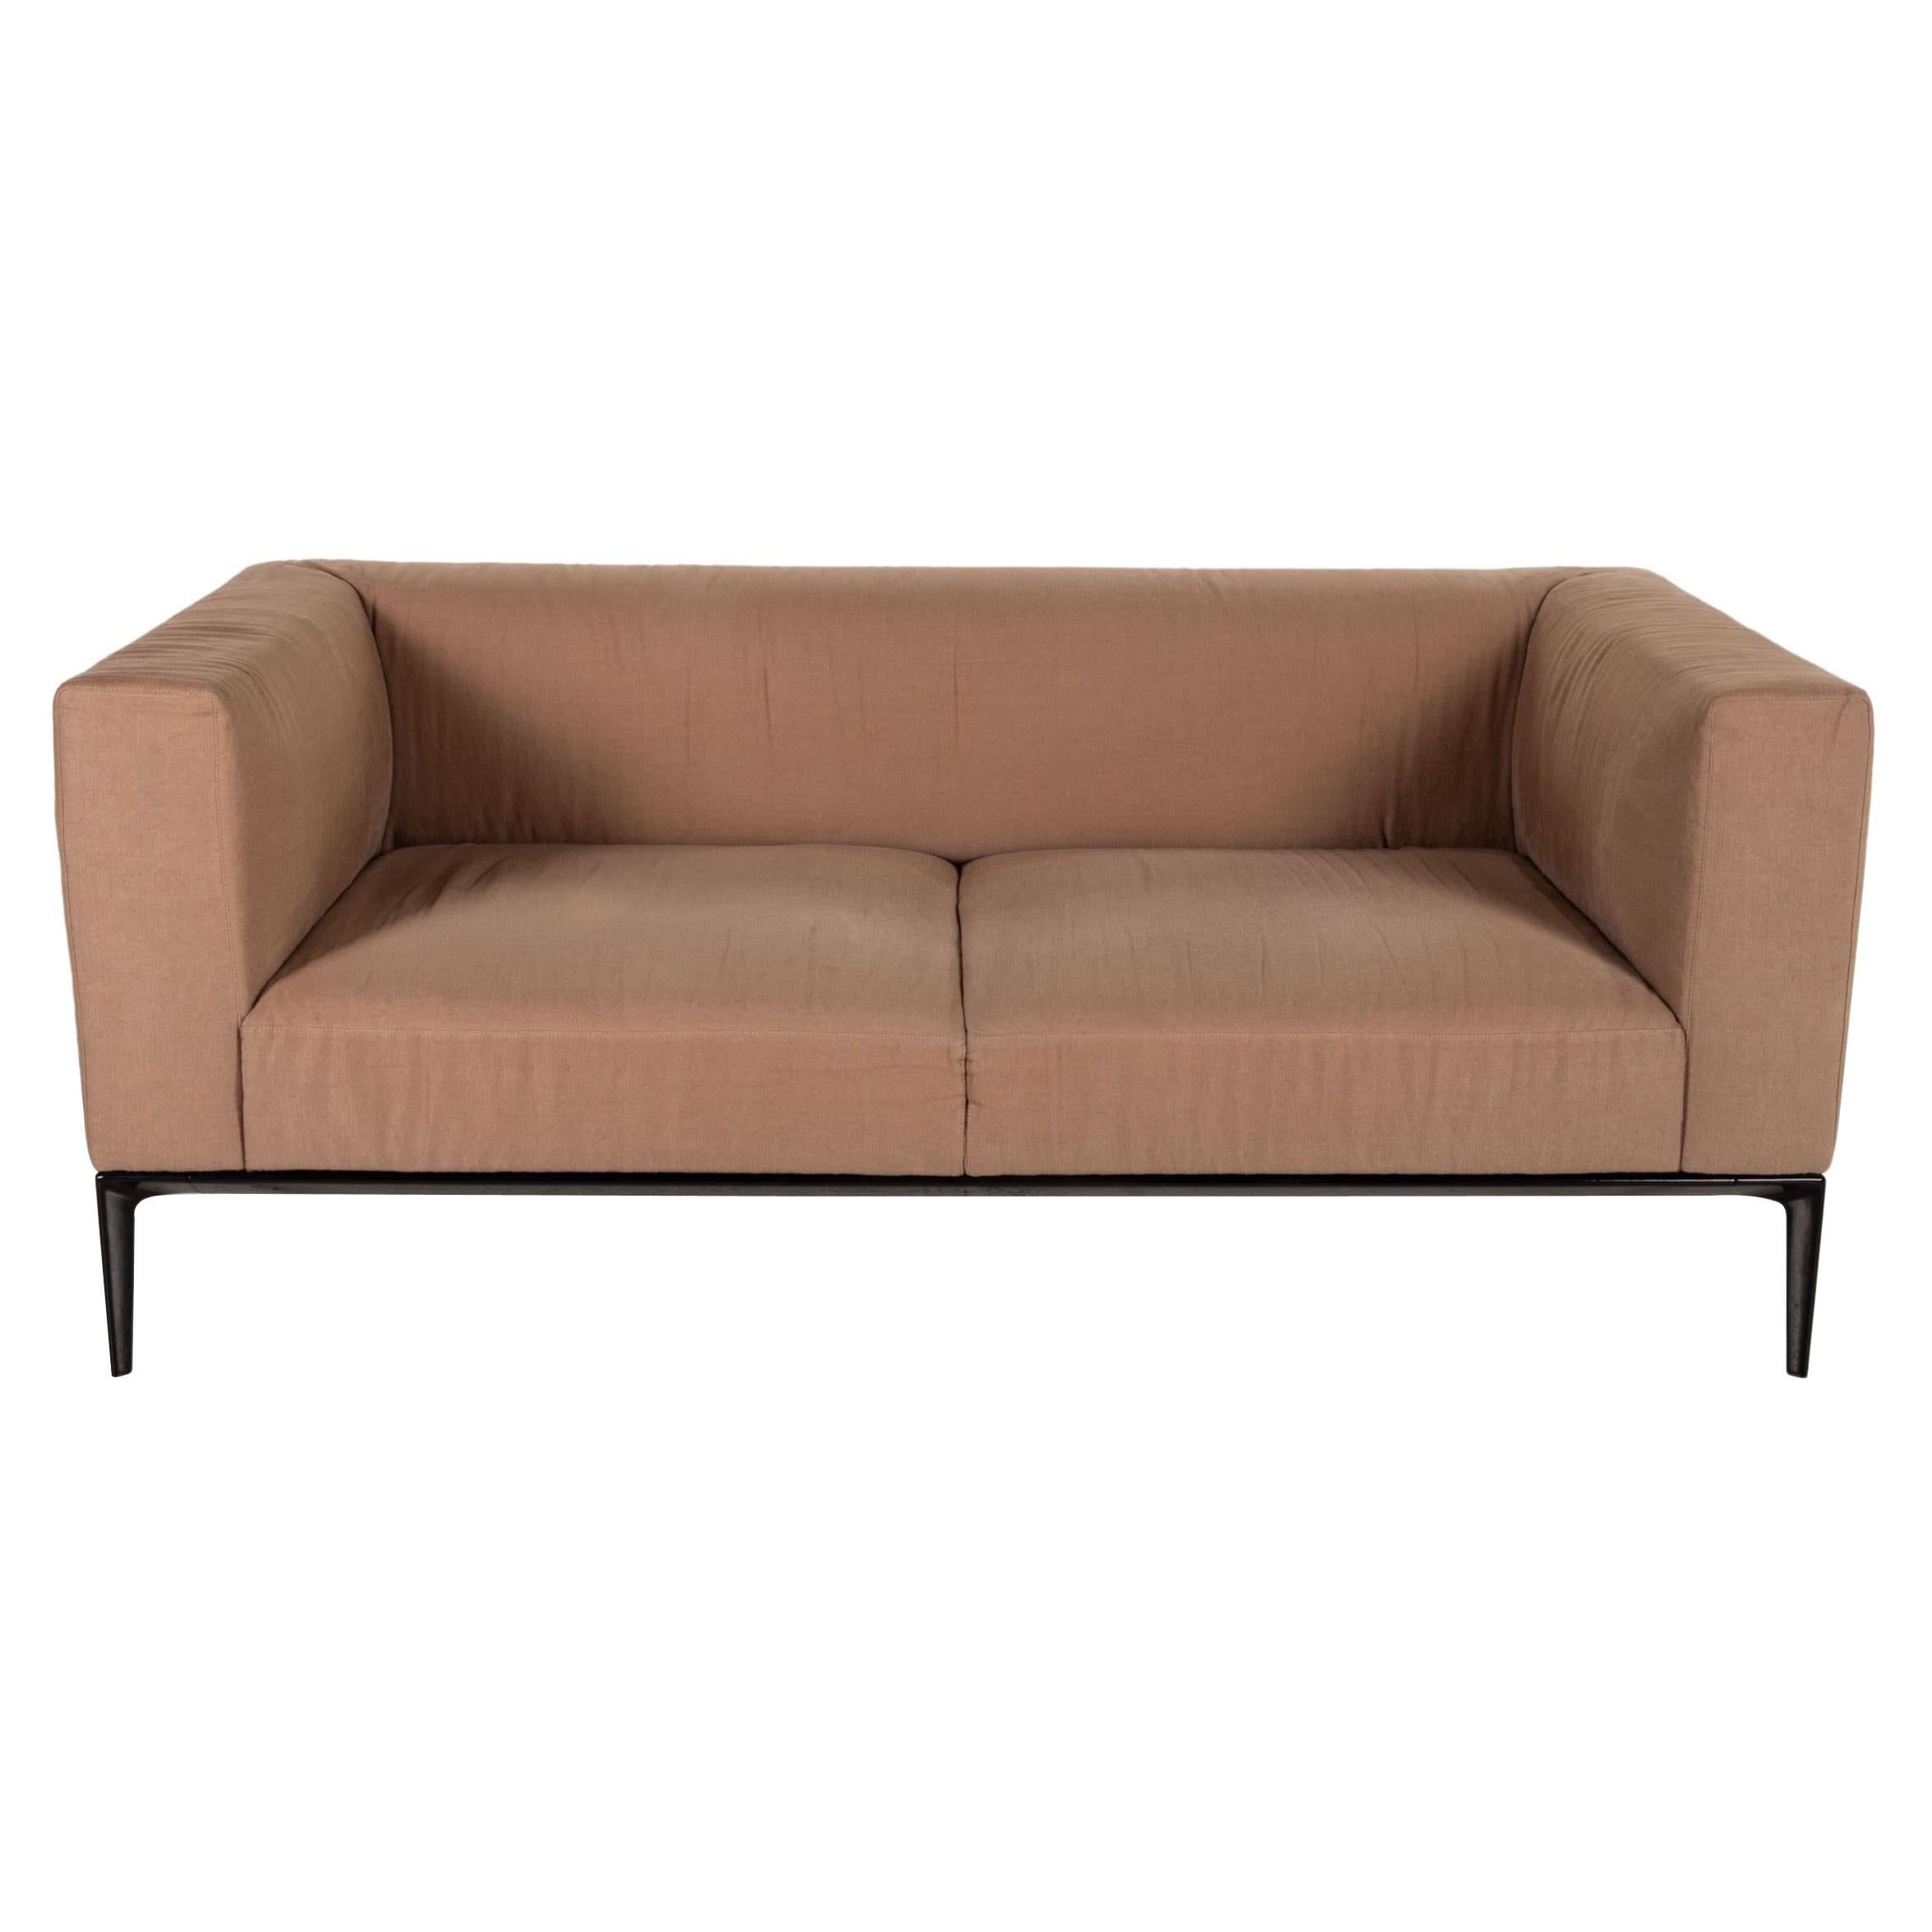 Walter Knoll Jaan Living Fabric Sofa Beige Two-Seater Couch For Sale